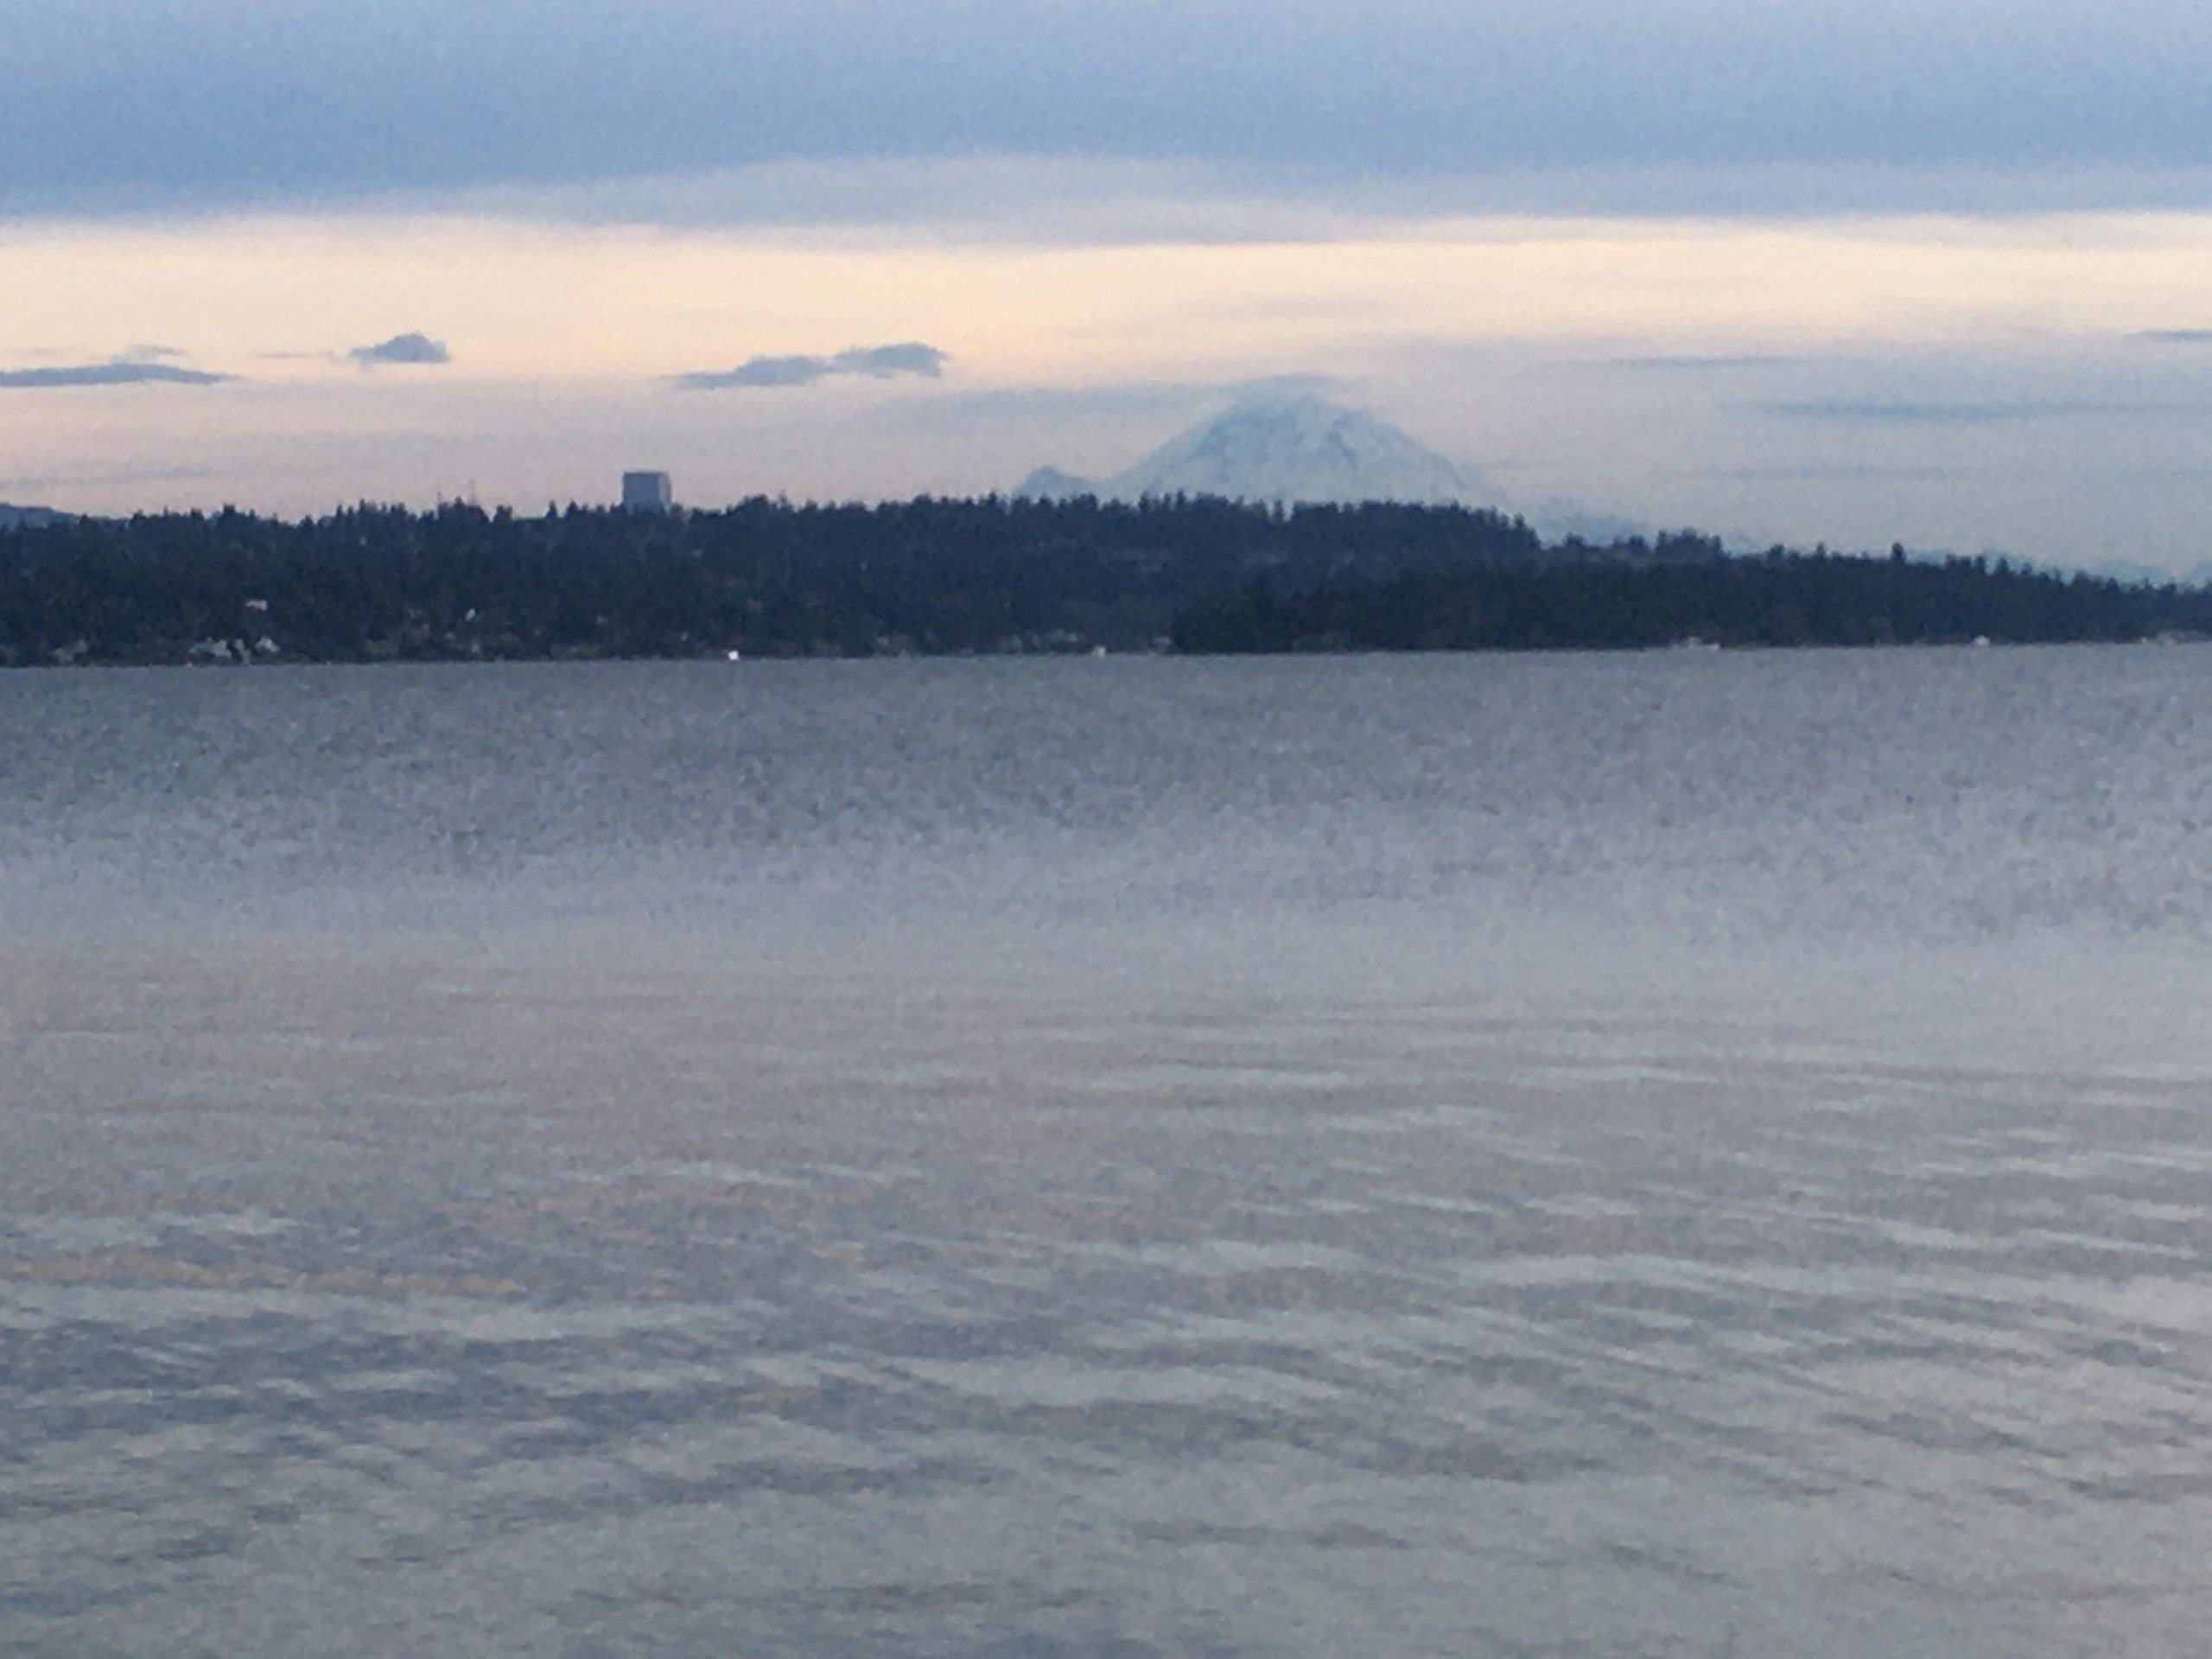 view of snow-covered mountain on the horizon. lake in the foreground.